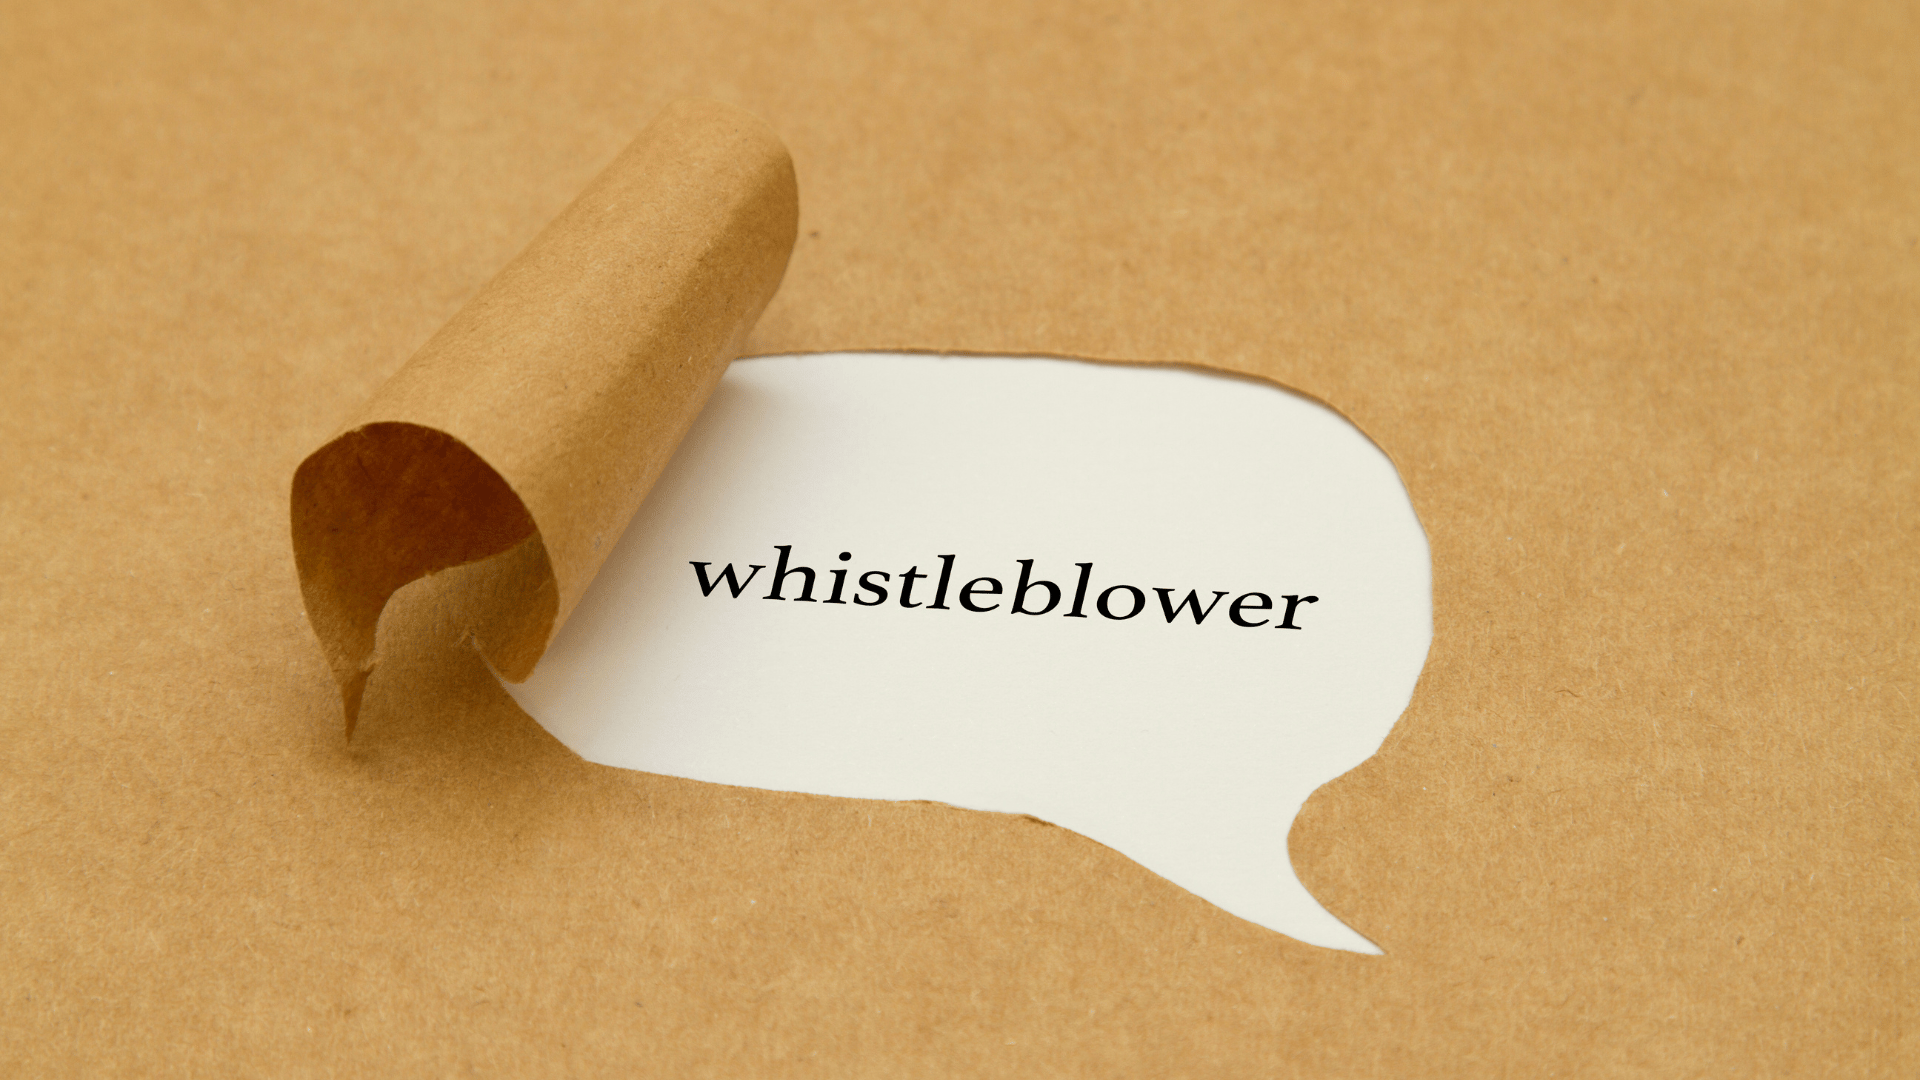 Thinking about Blowing the Whistle? Here are Some Key Concepts You Need to Understand – Part 1